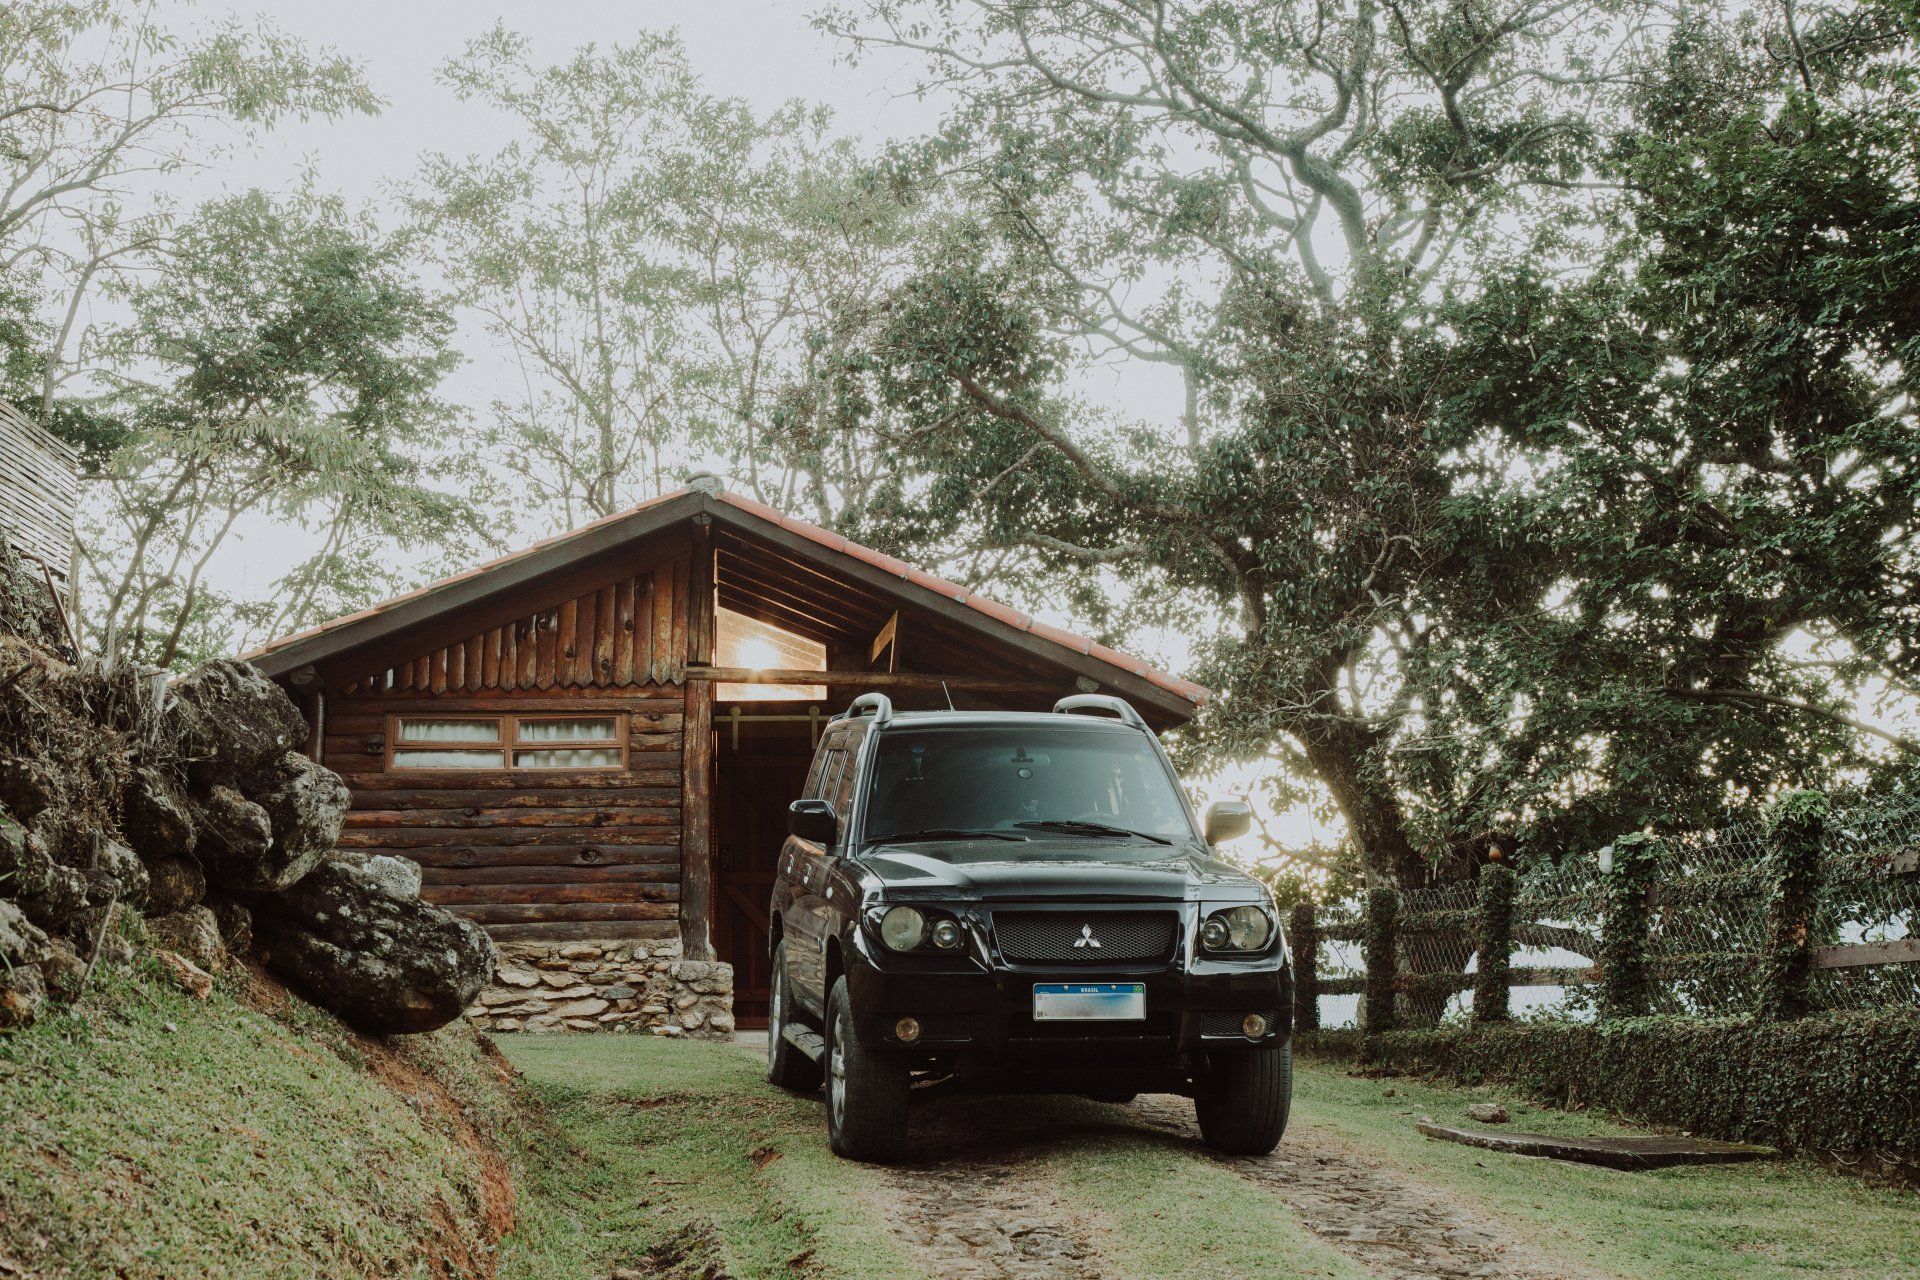 Black Toyota Landcruiser parked in front of wooden cabin